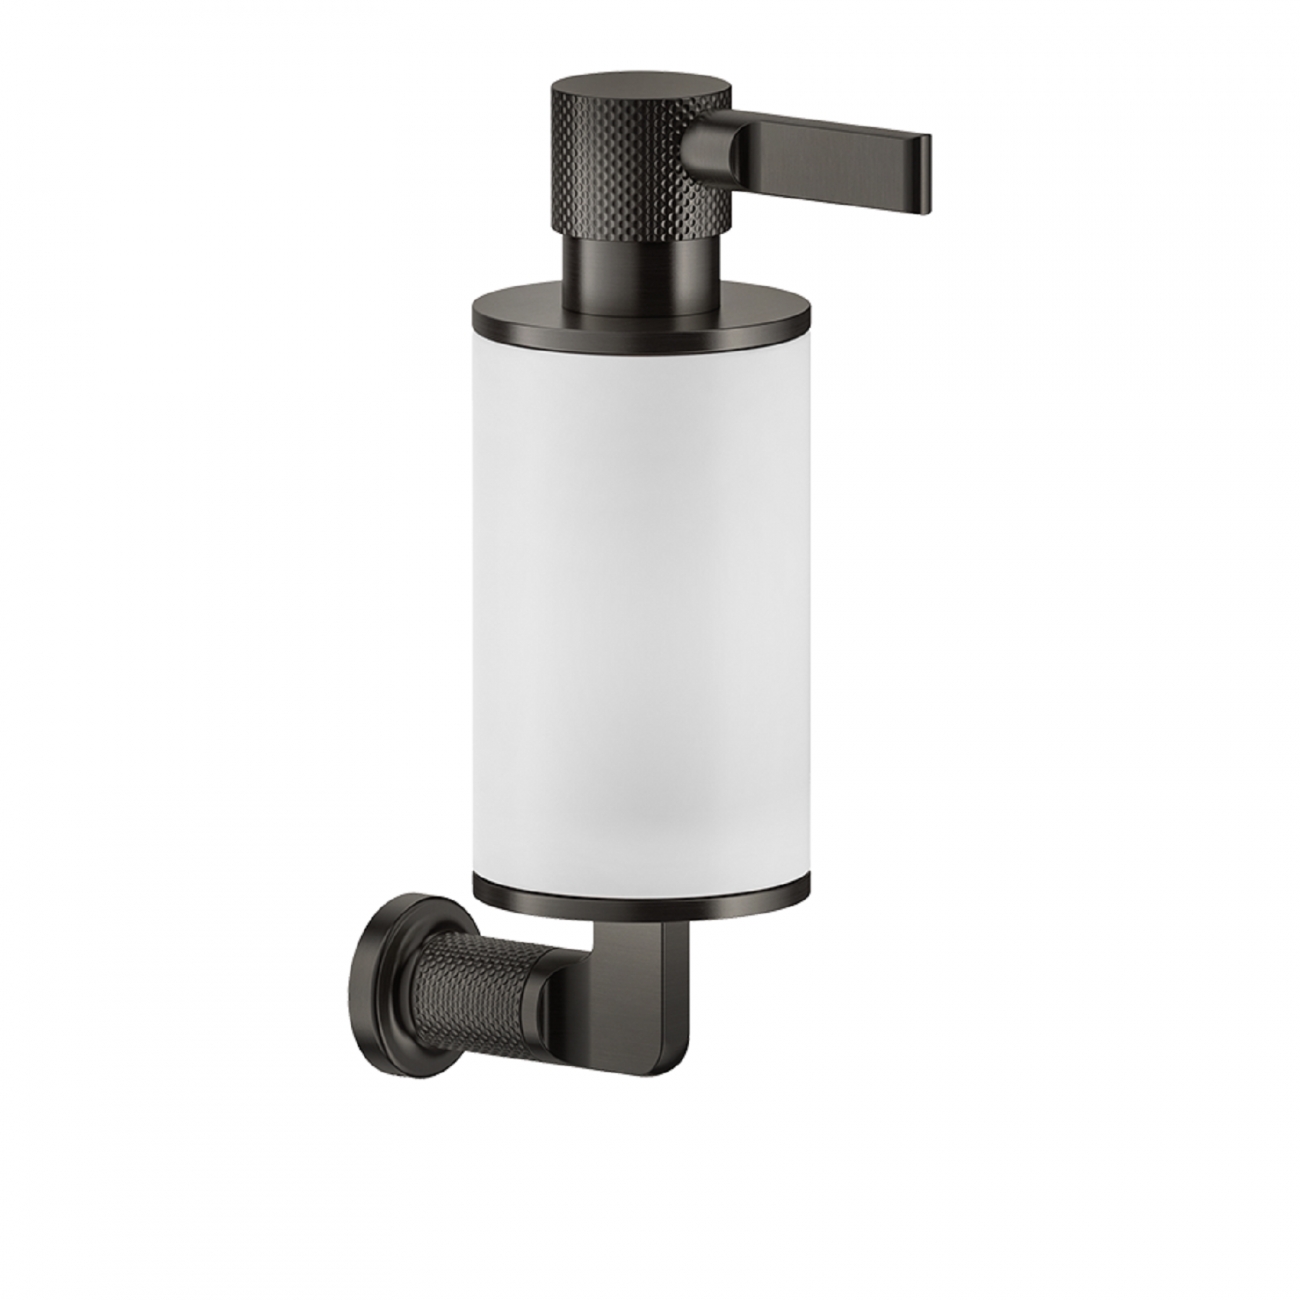 GESSI INCISO WALL MOUNTED SOAP DISPENSER HOLDER